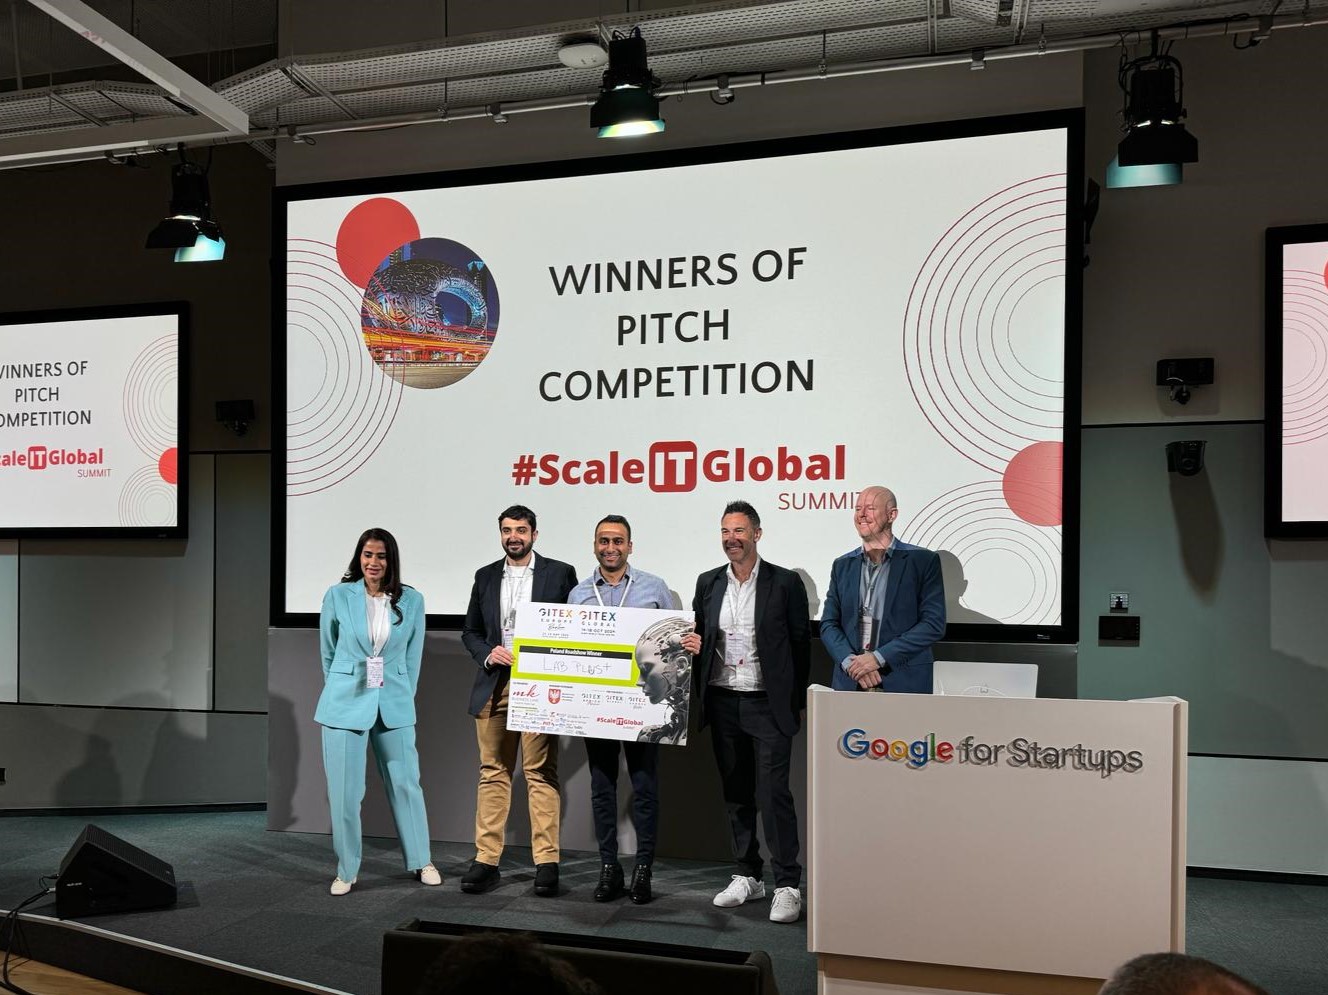 Succes in #ScaleITGlobal Summit competition